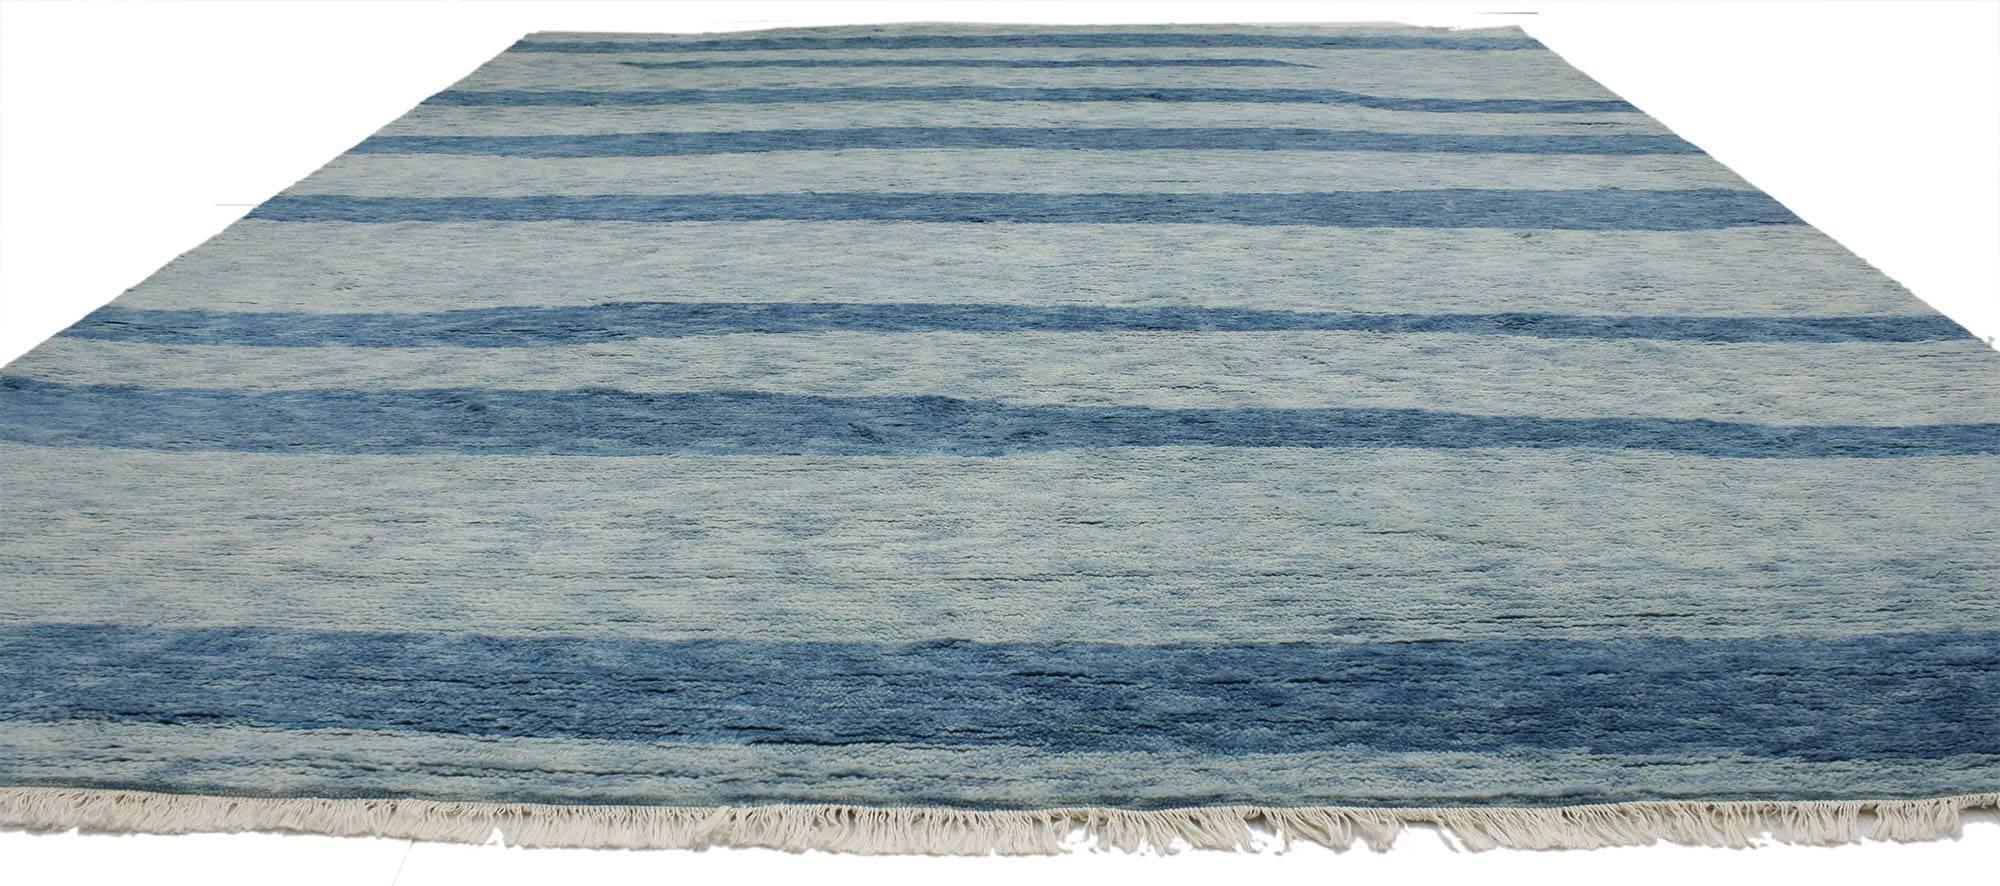 30345 New Contemporary Coastal Moroccan Rug with Postmodern and Beach Hygge Style. The postmodern style meets Cape Cod coastal vibes without going over the top in this hand-knotted wool contemporary Moroccan area rug. The abstract design combined